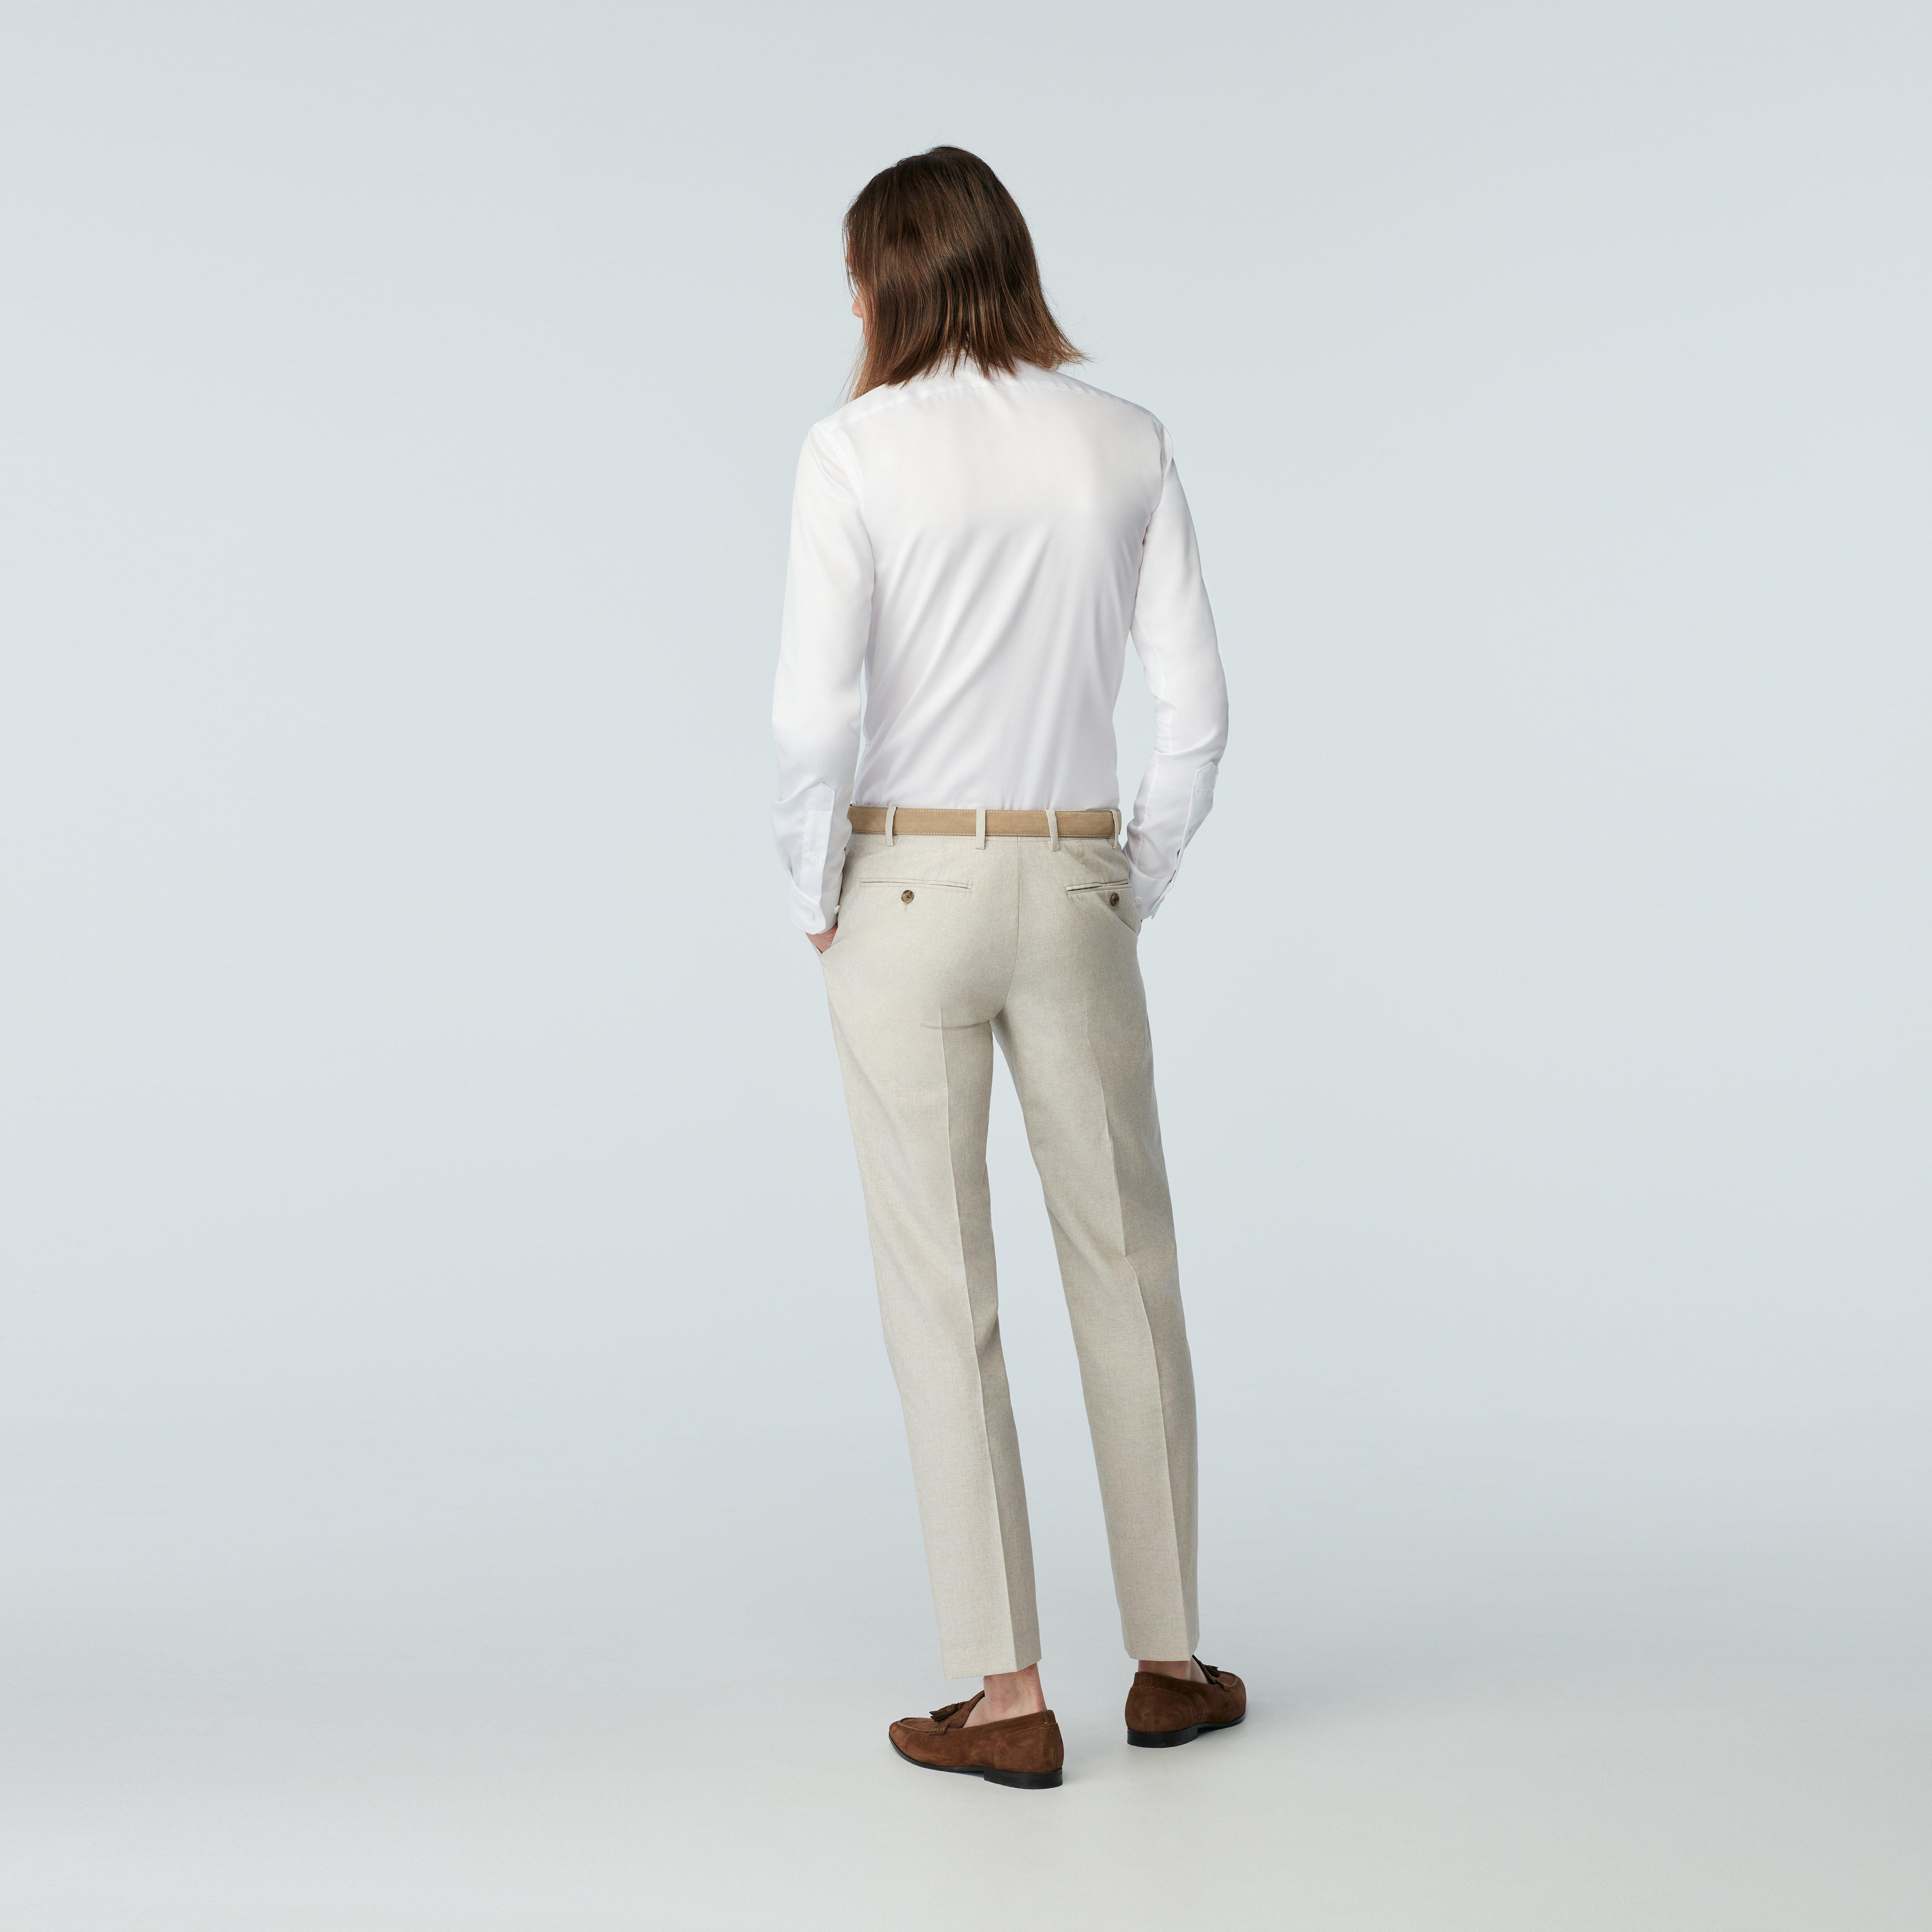 Custom Suits Made For You - Montella Wool Cotton Silk Cream Suit ...